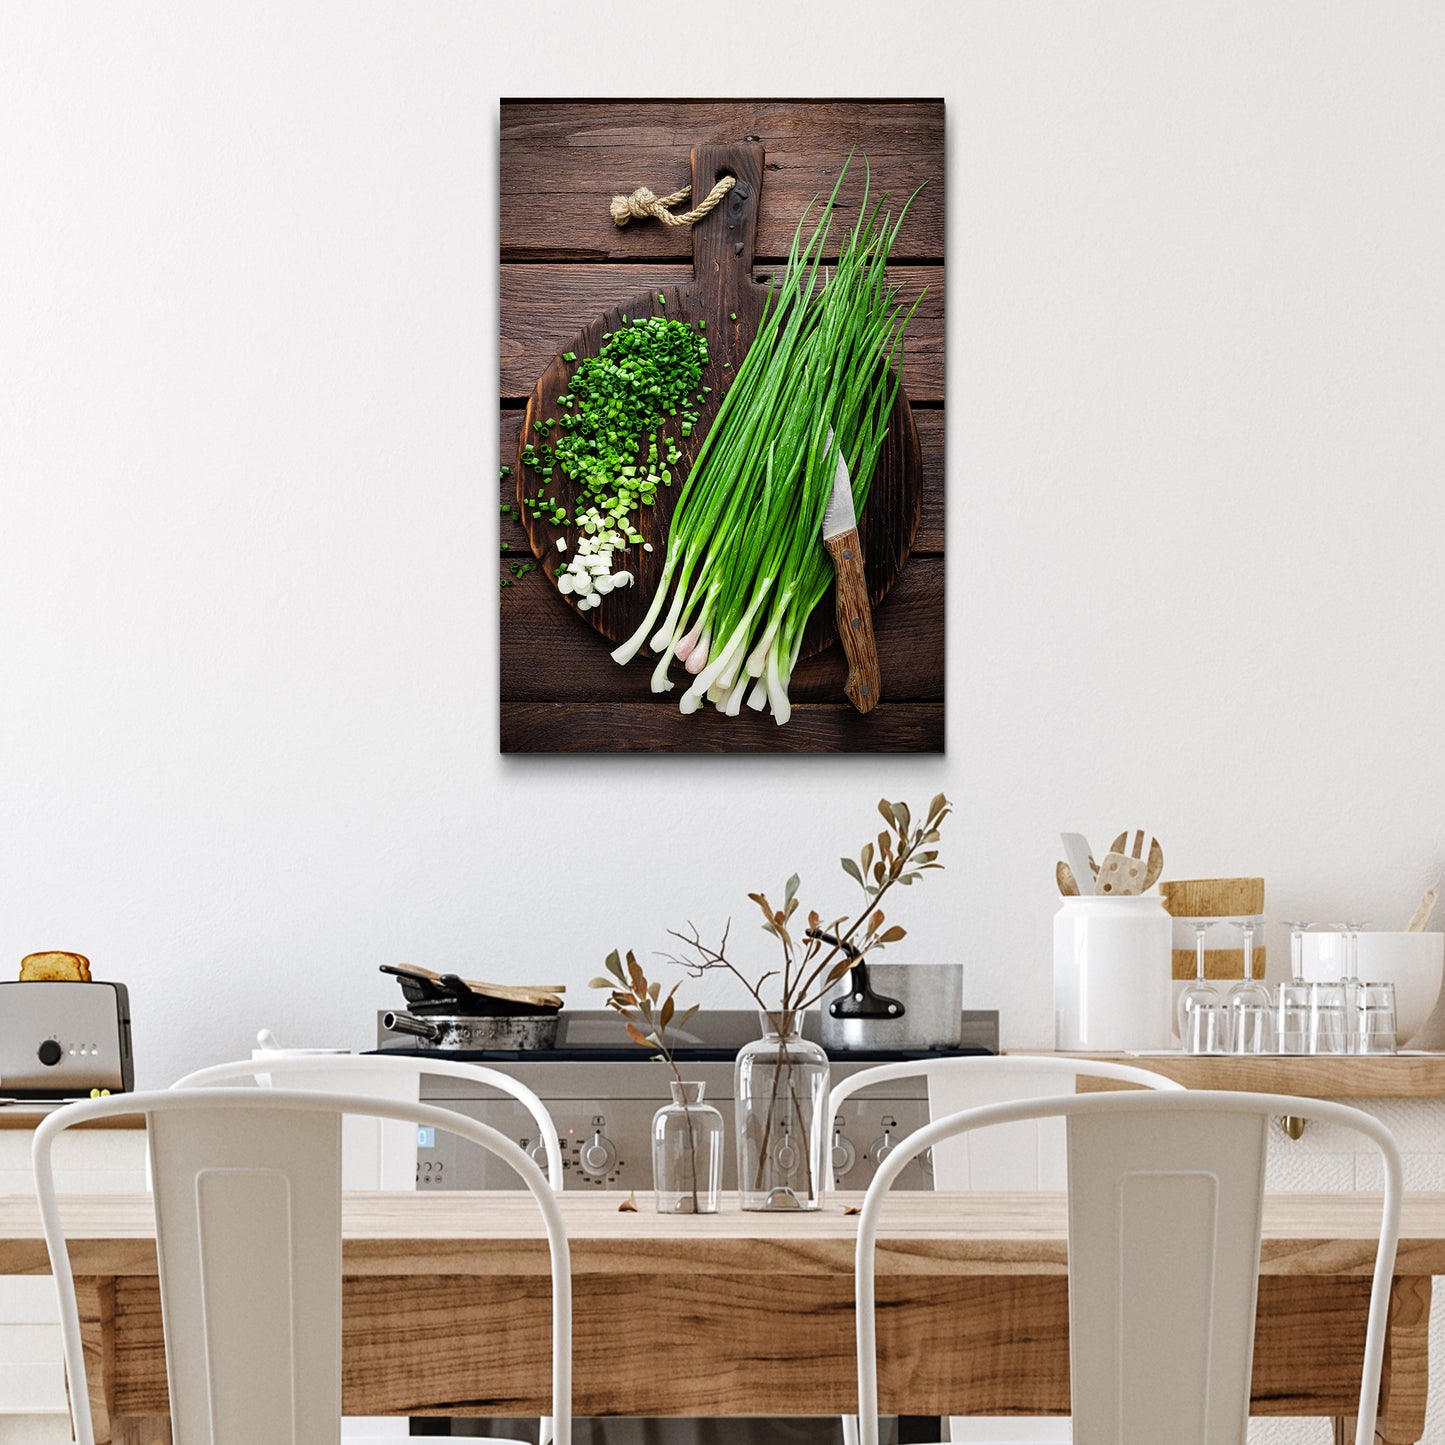 Plant Herb Chopped Chives Canvas Wall Art - Image by Tailored Canvases